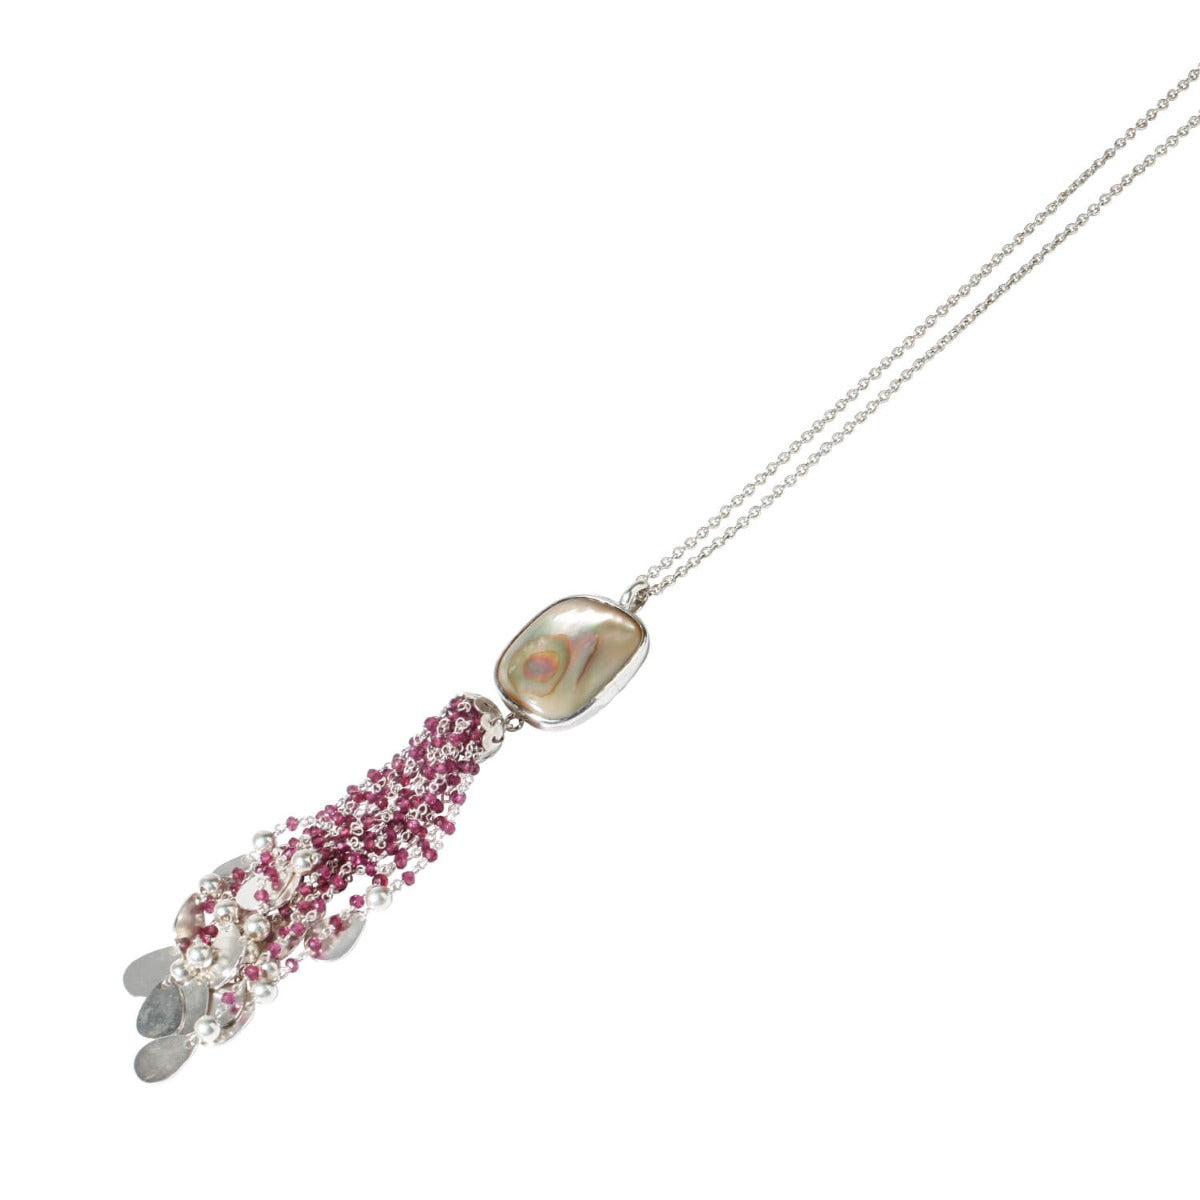 Abalone and Silver 925 Necklace with Garnet Tassel